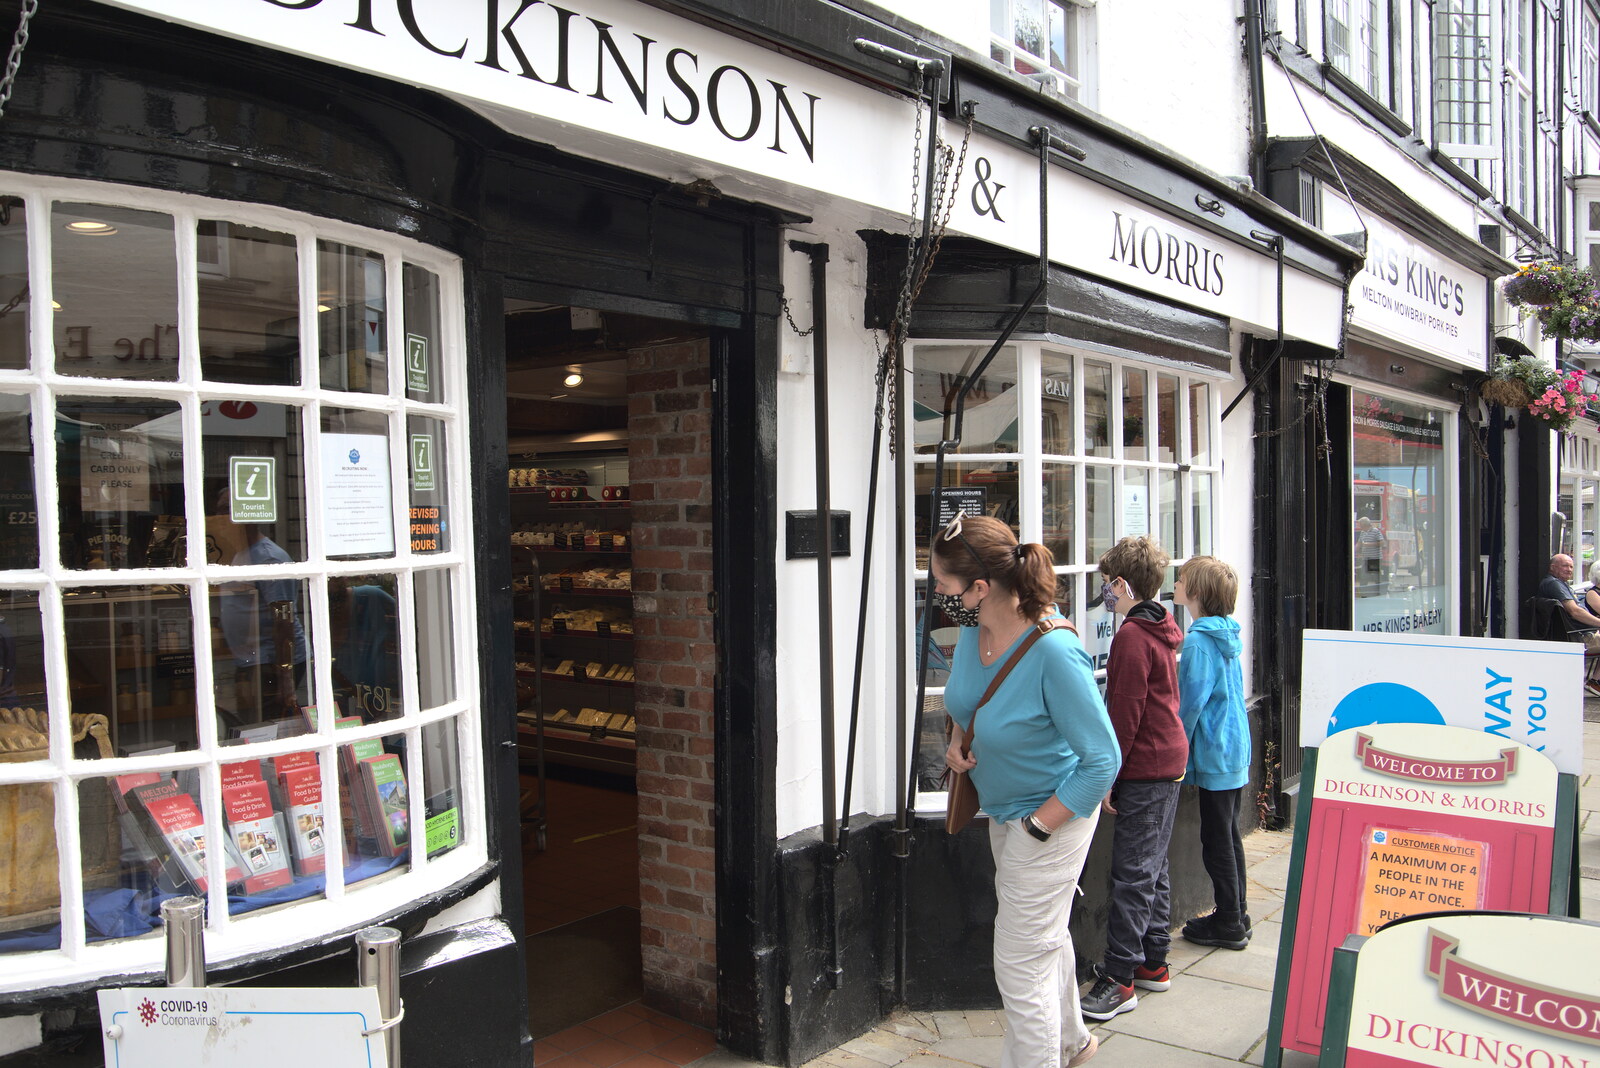 We head into Dickinson and Morris pork pie shop from Pork Pies and Dockside Dereliction, Melton Mowbray and Liverpool - 7th August 2021